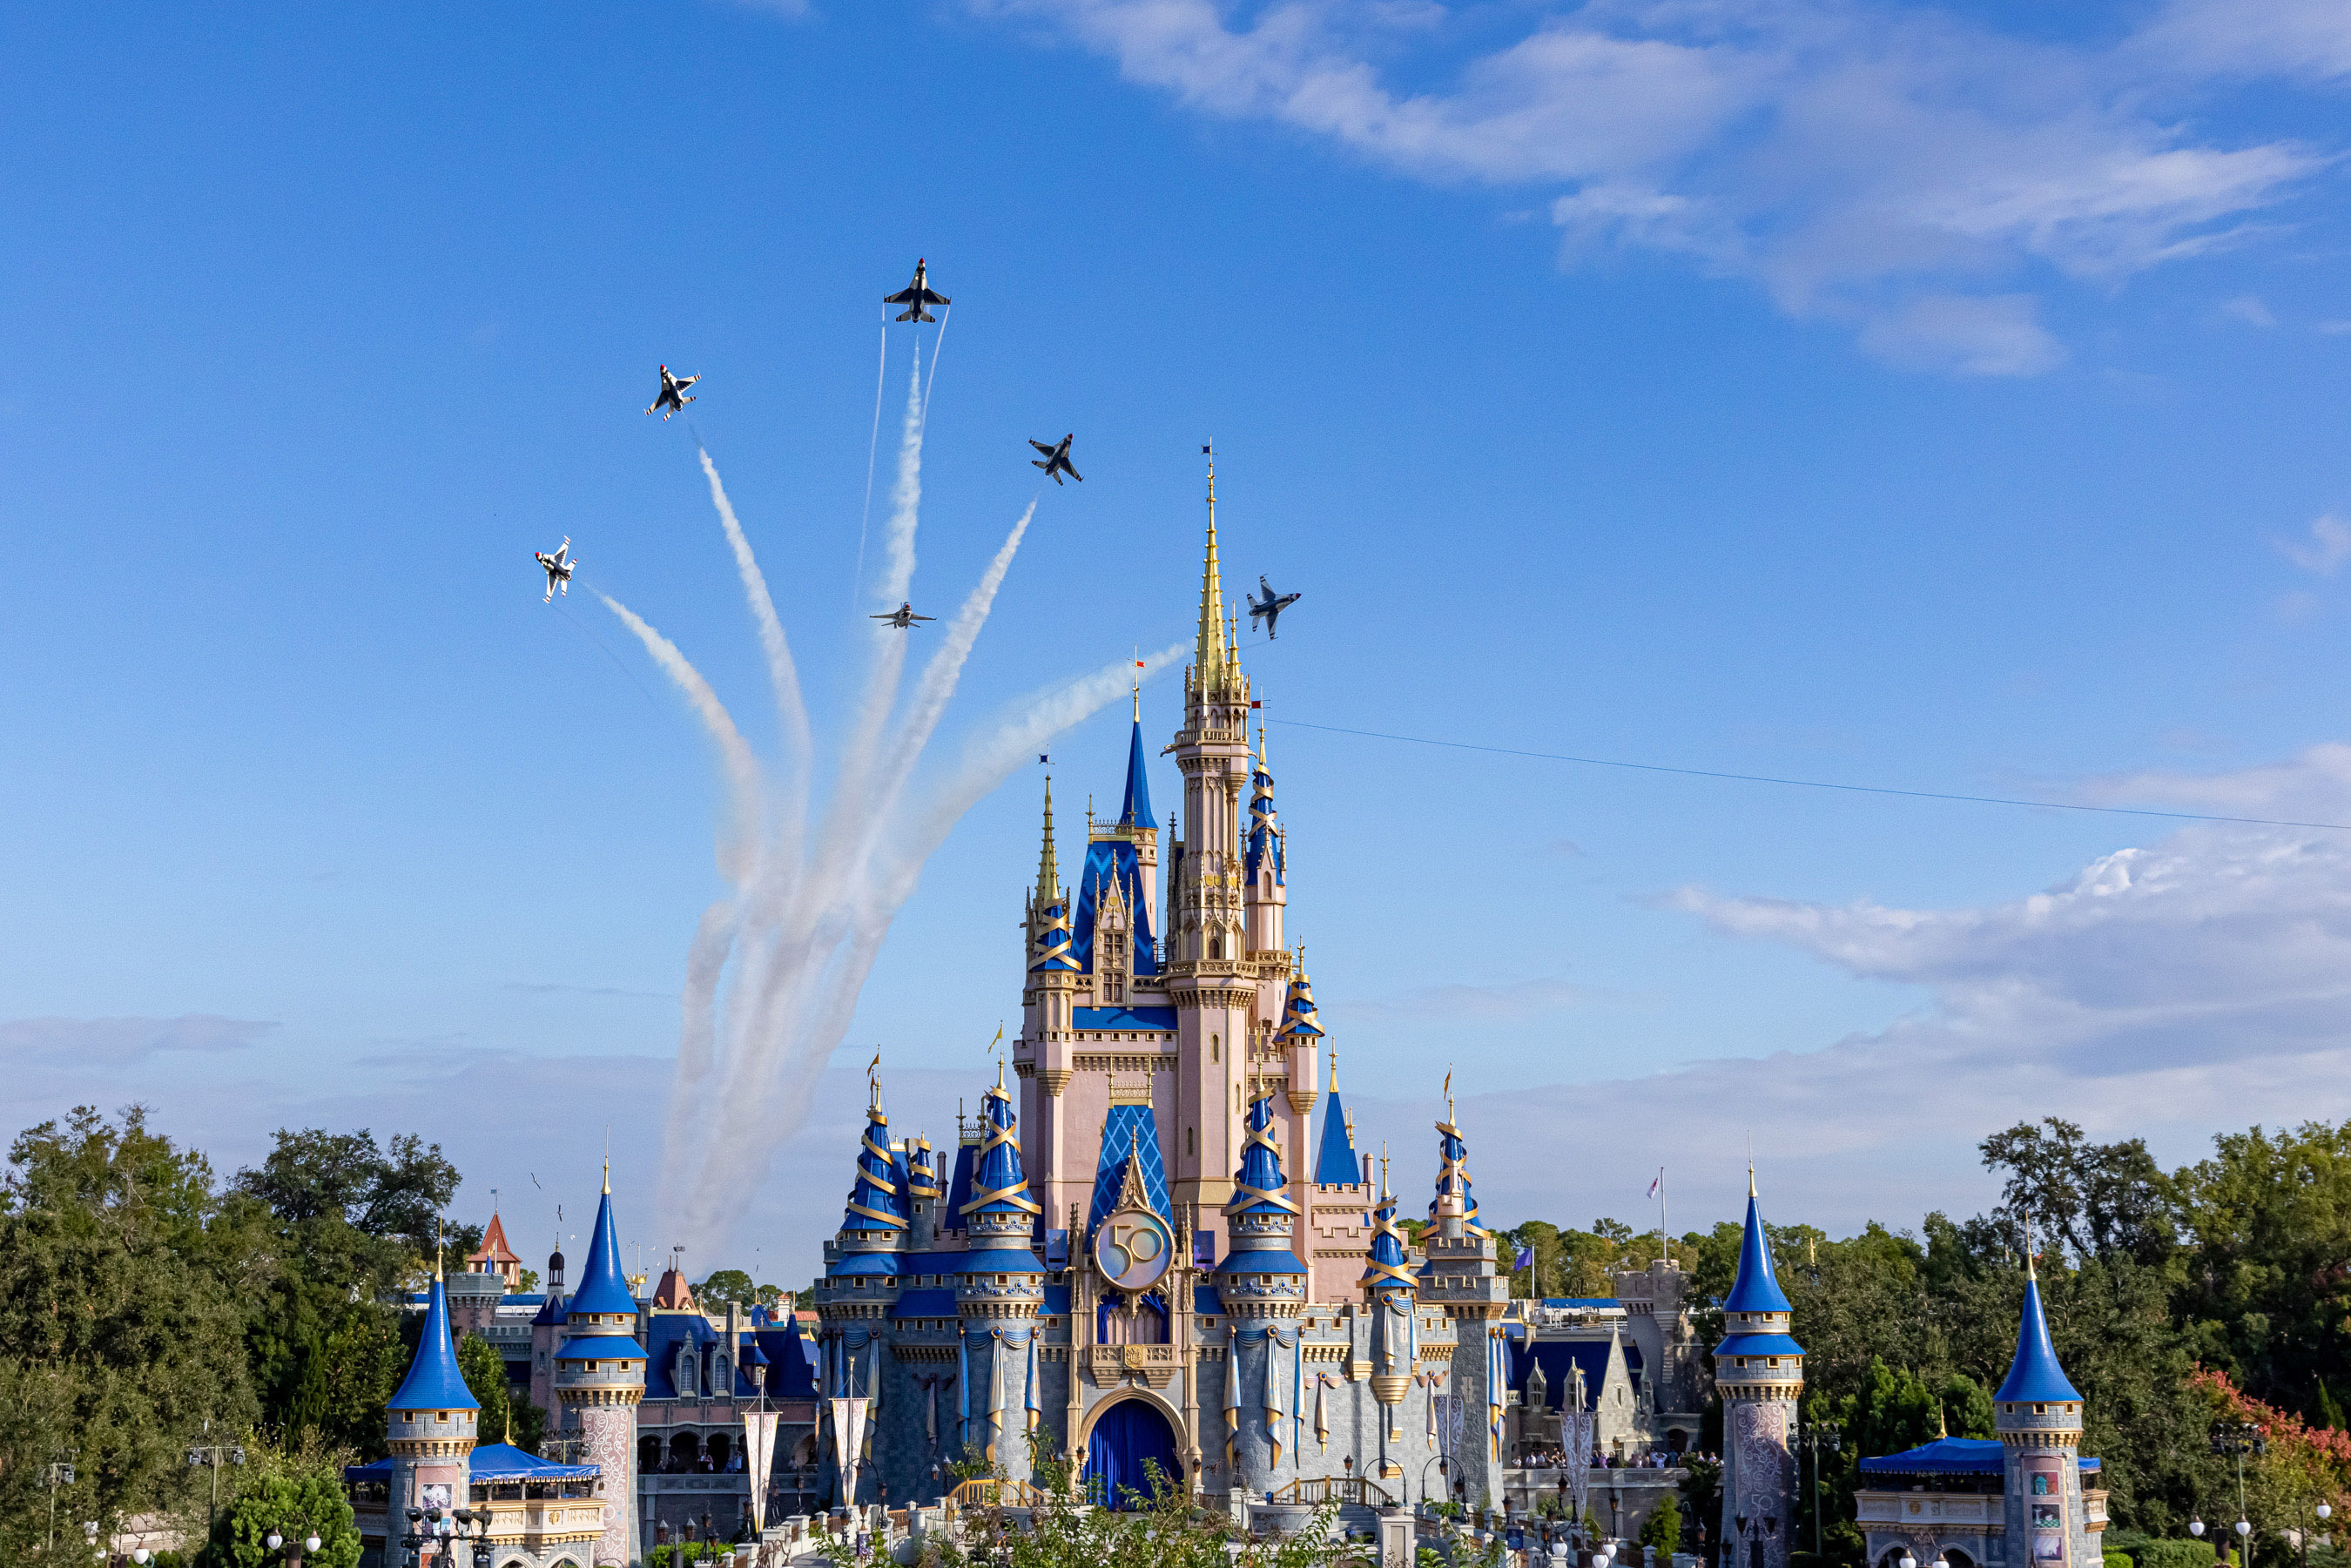 Top 19 Orlando Theme Parks and Attractions (2023 Edition)